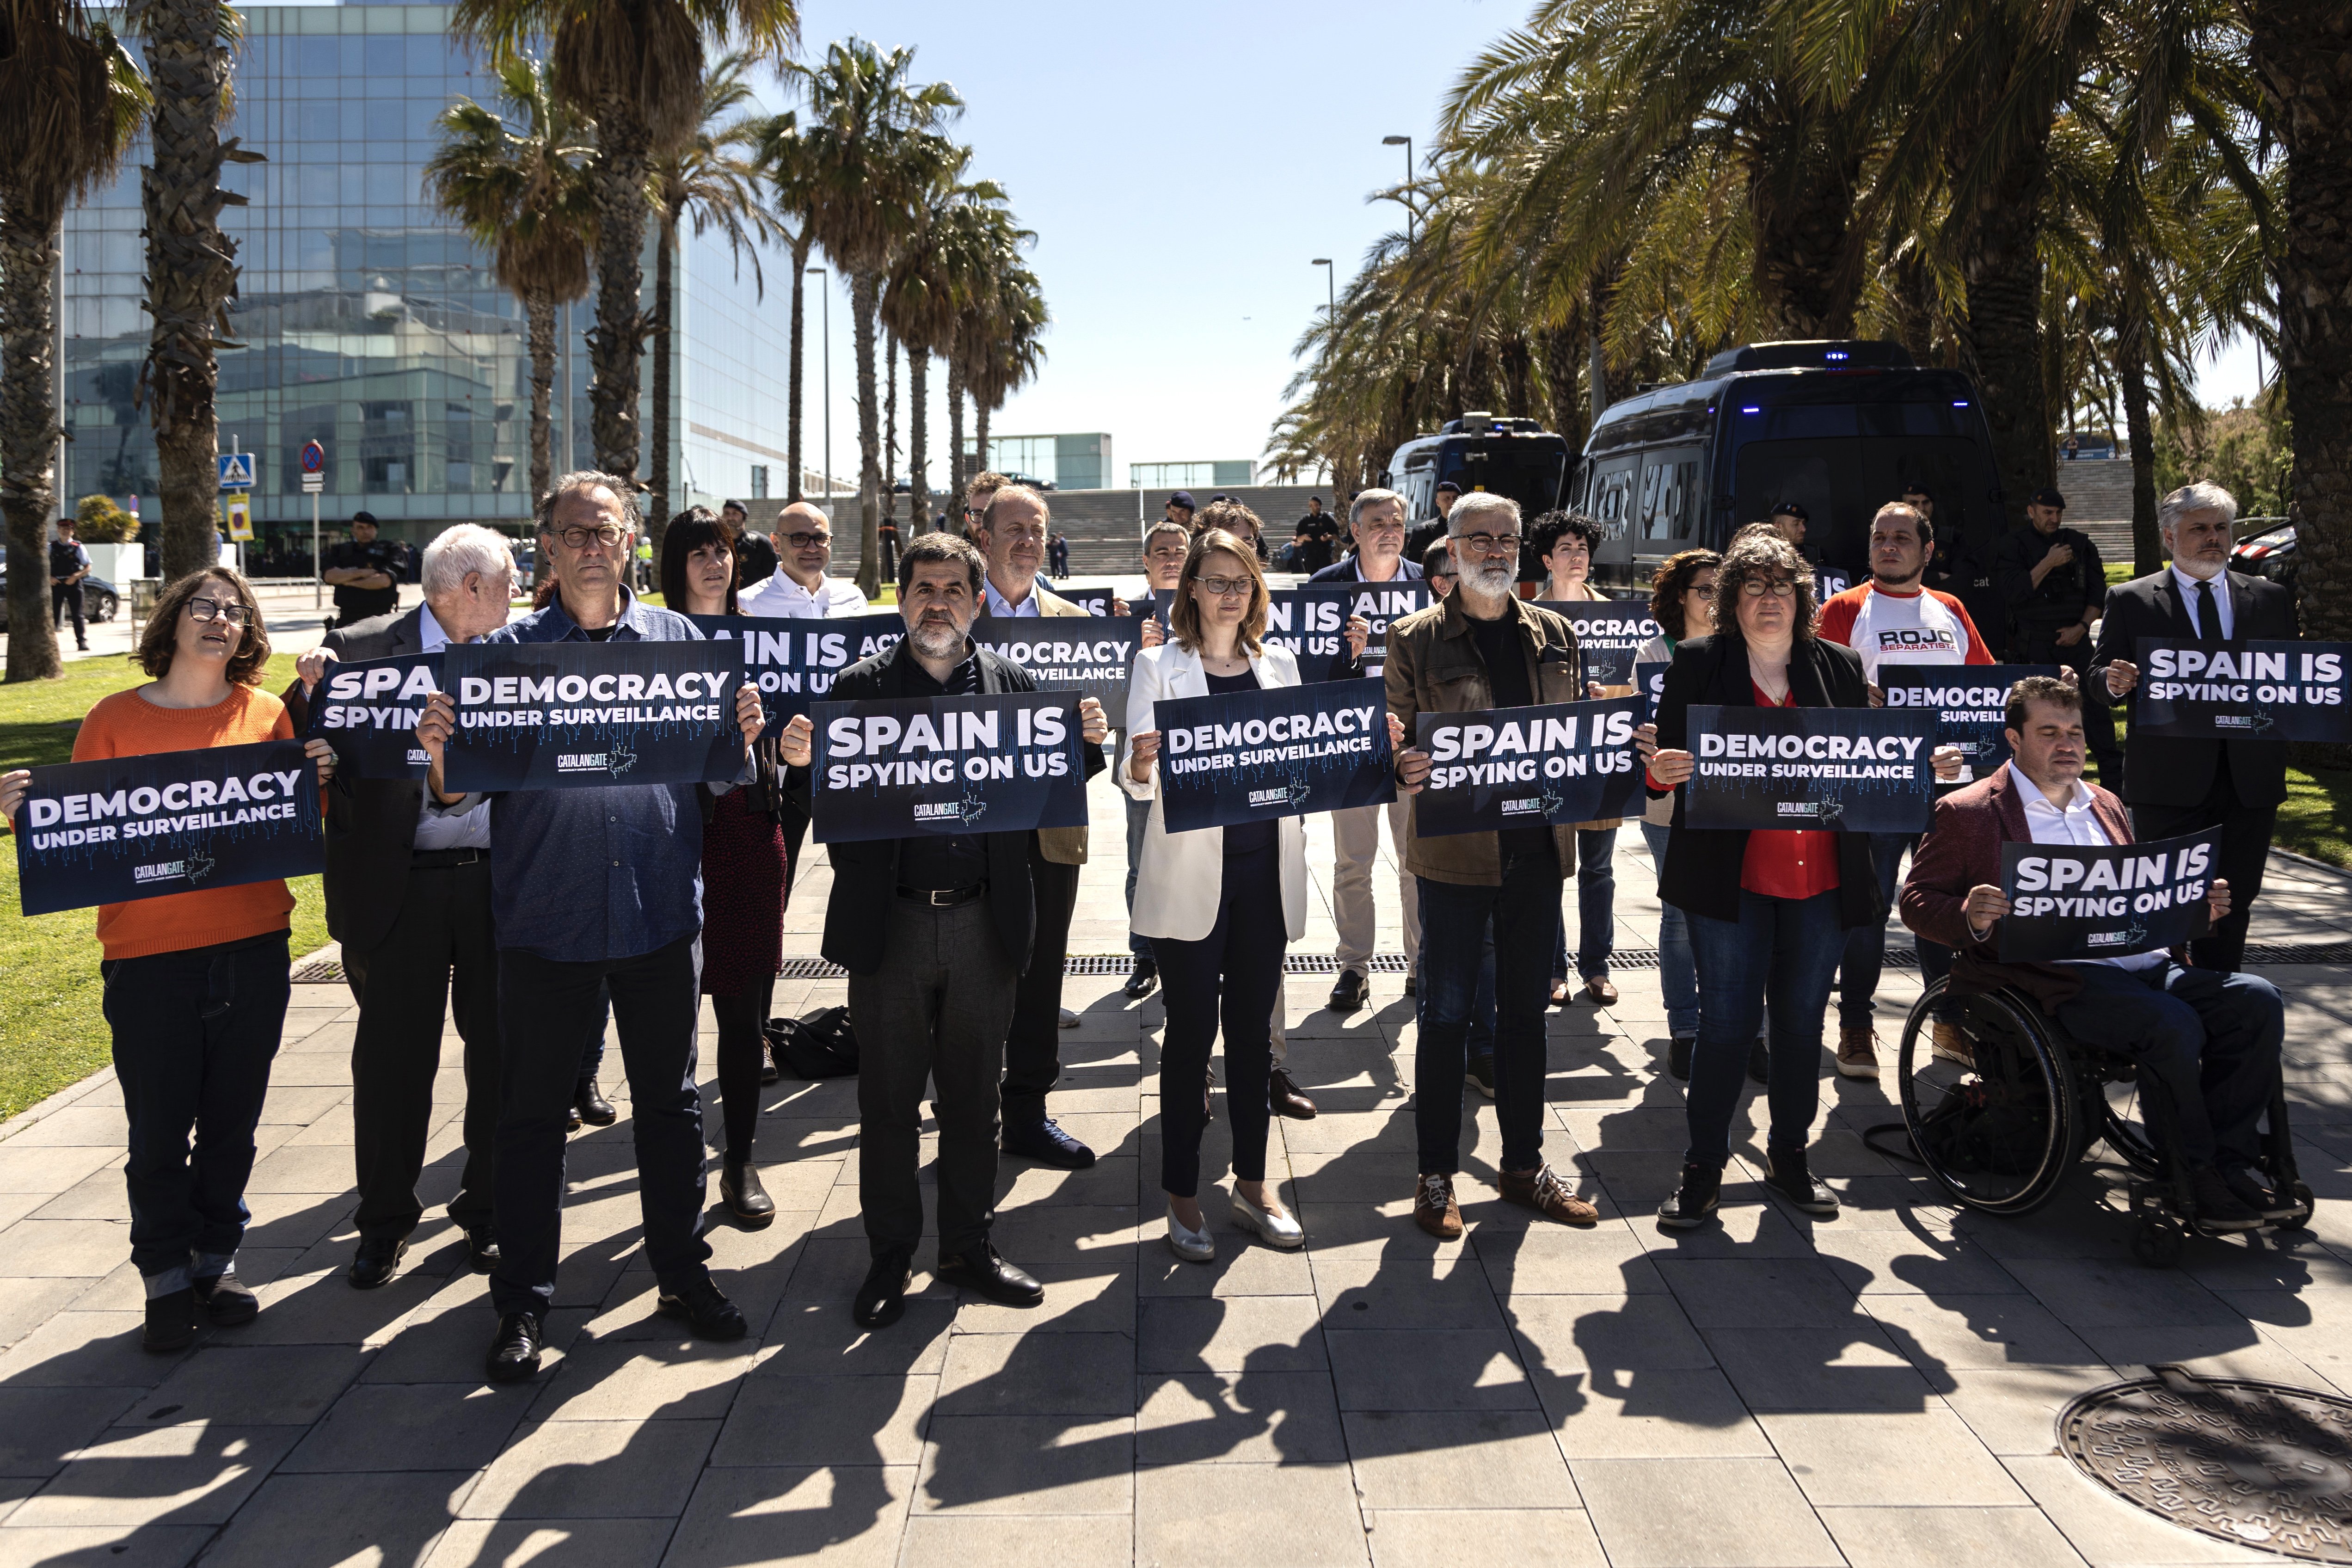 Human Rights Watch denounces Spain's espionage against Catalan independence movement